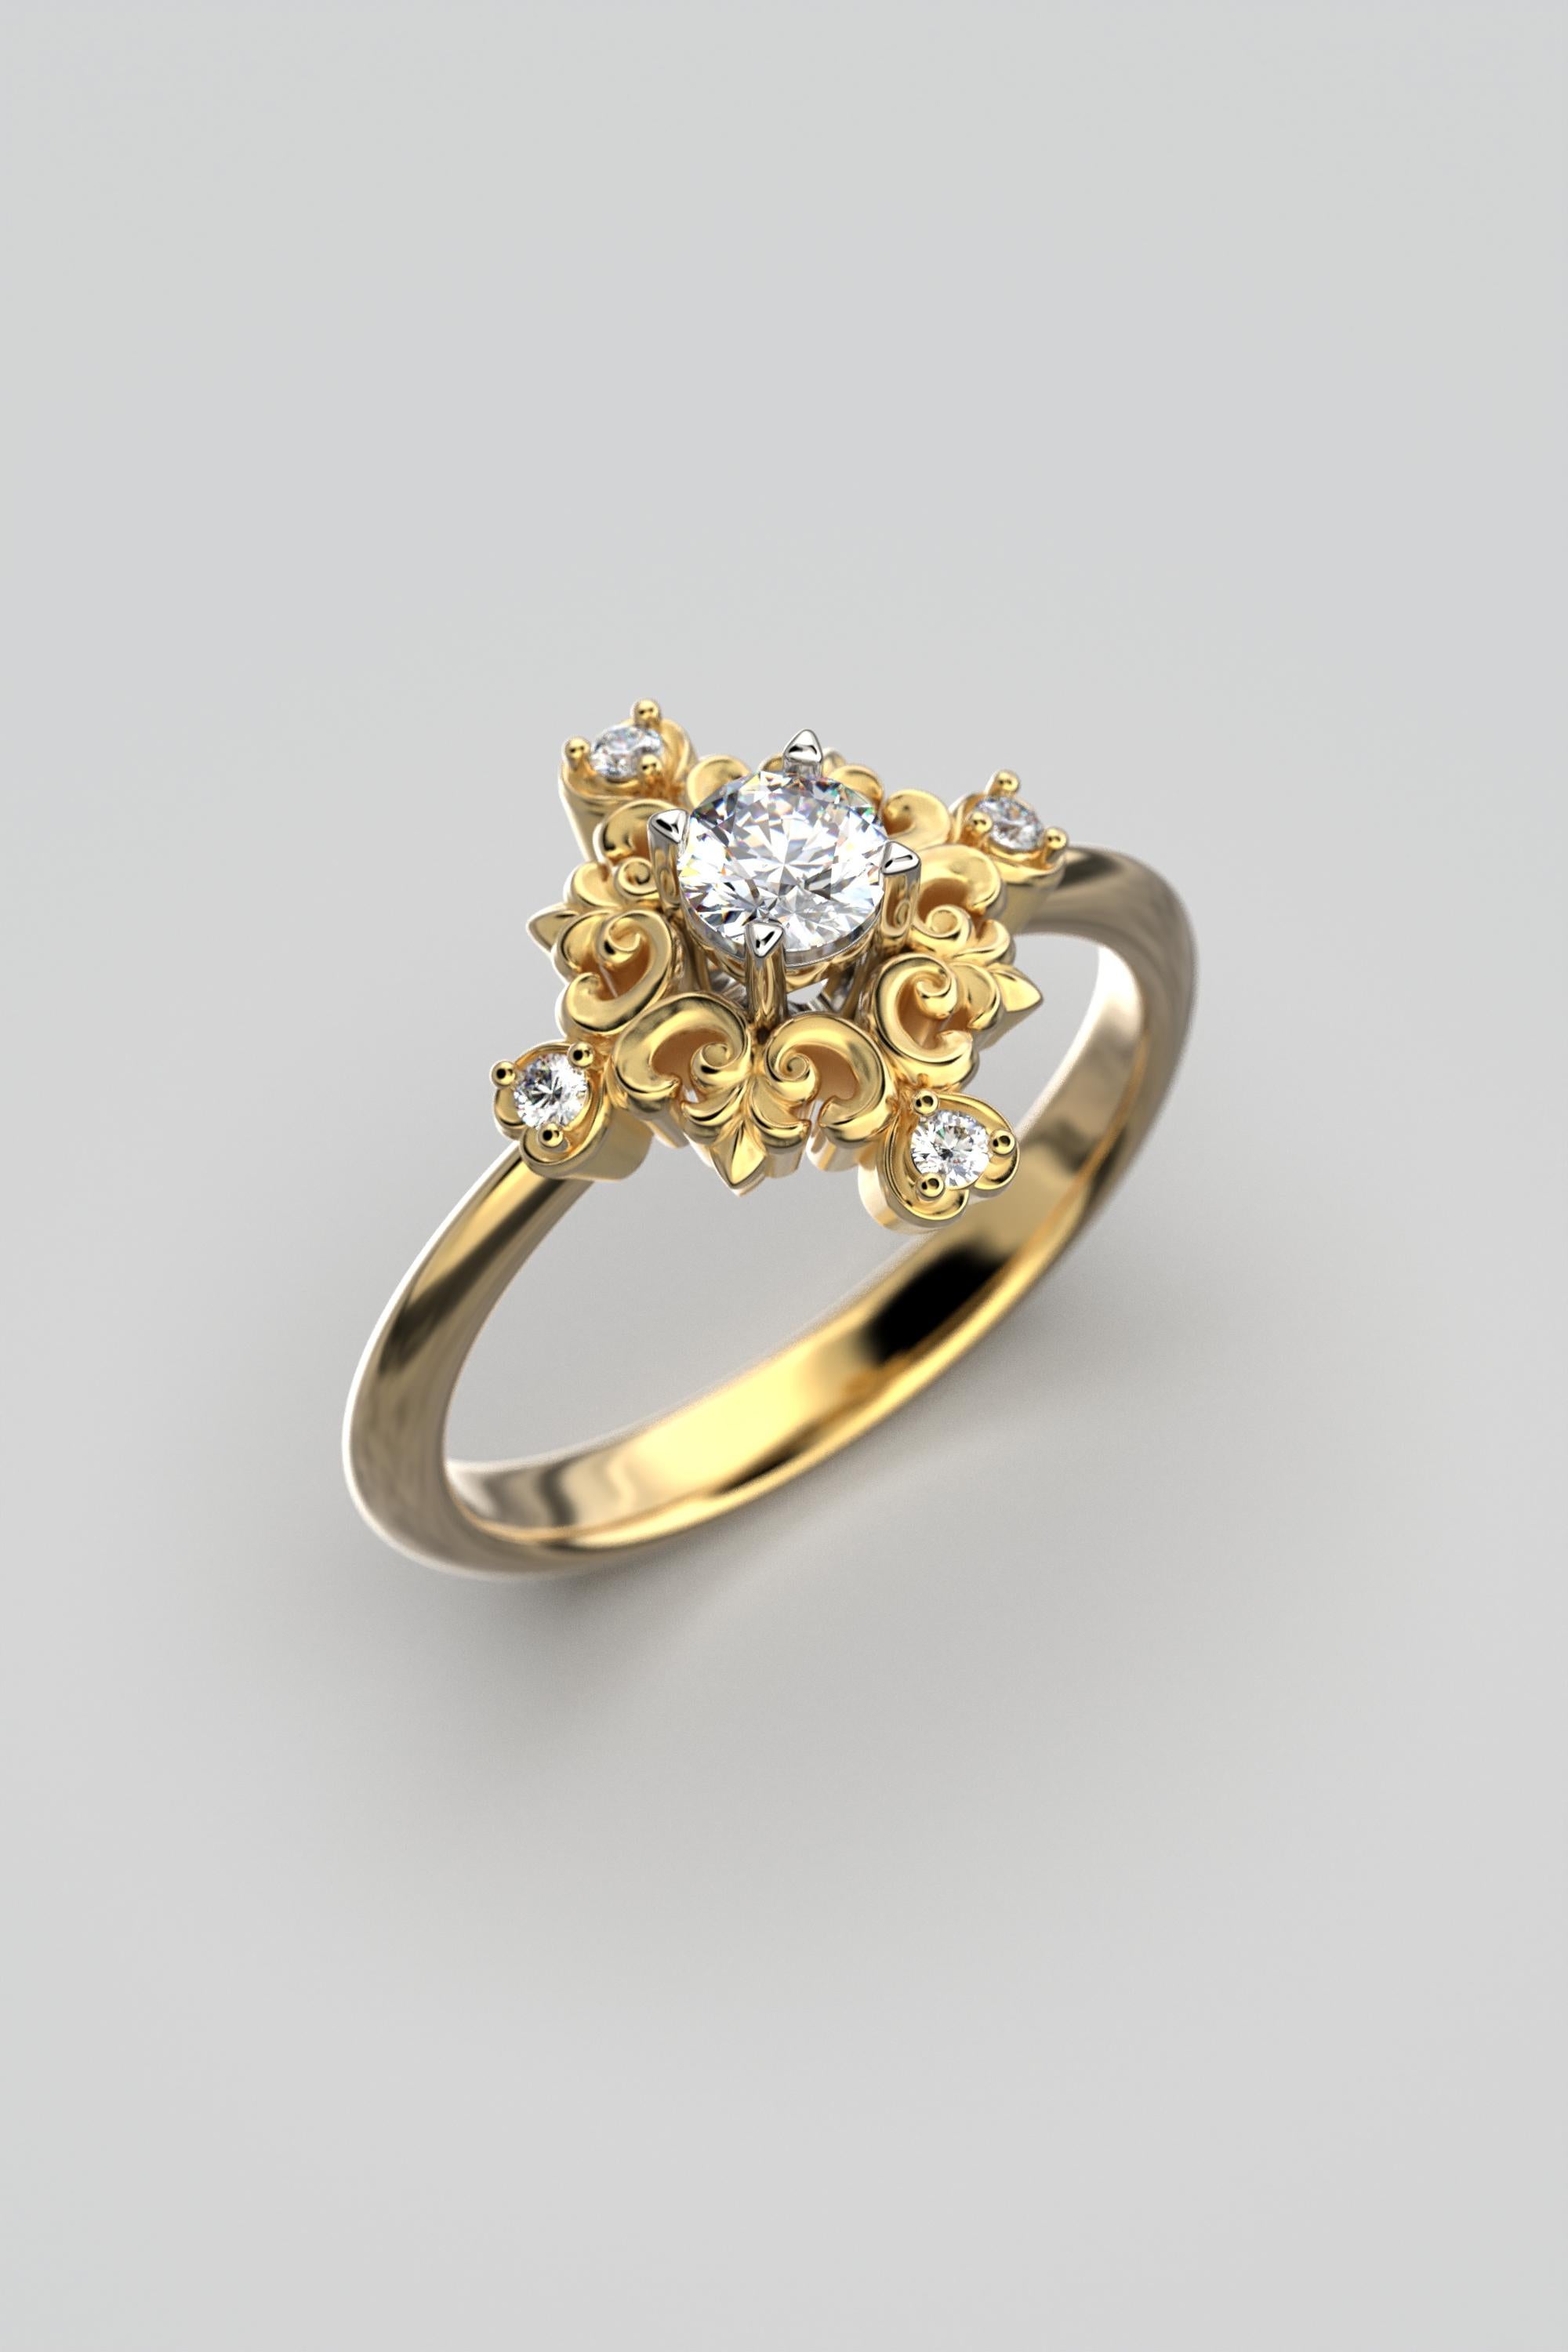 For Sale:  18k Gold Italian Diamond Engagement Ring in Baroque Style by Oltremare Gioielli 2